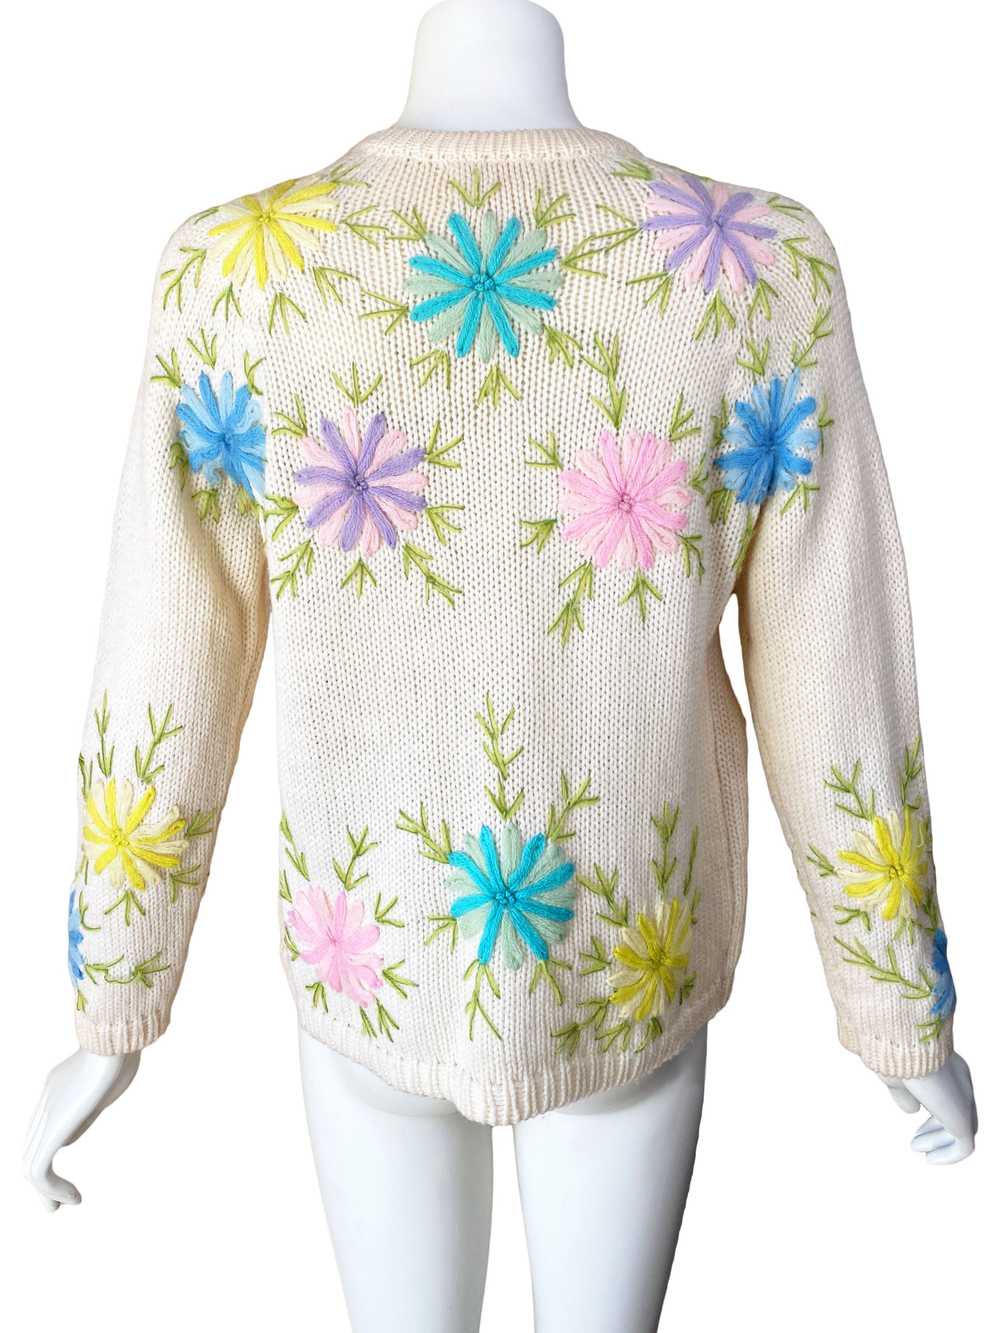 1960s Pastel Embroidered Cardgan - image 3